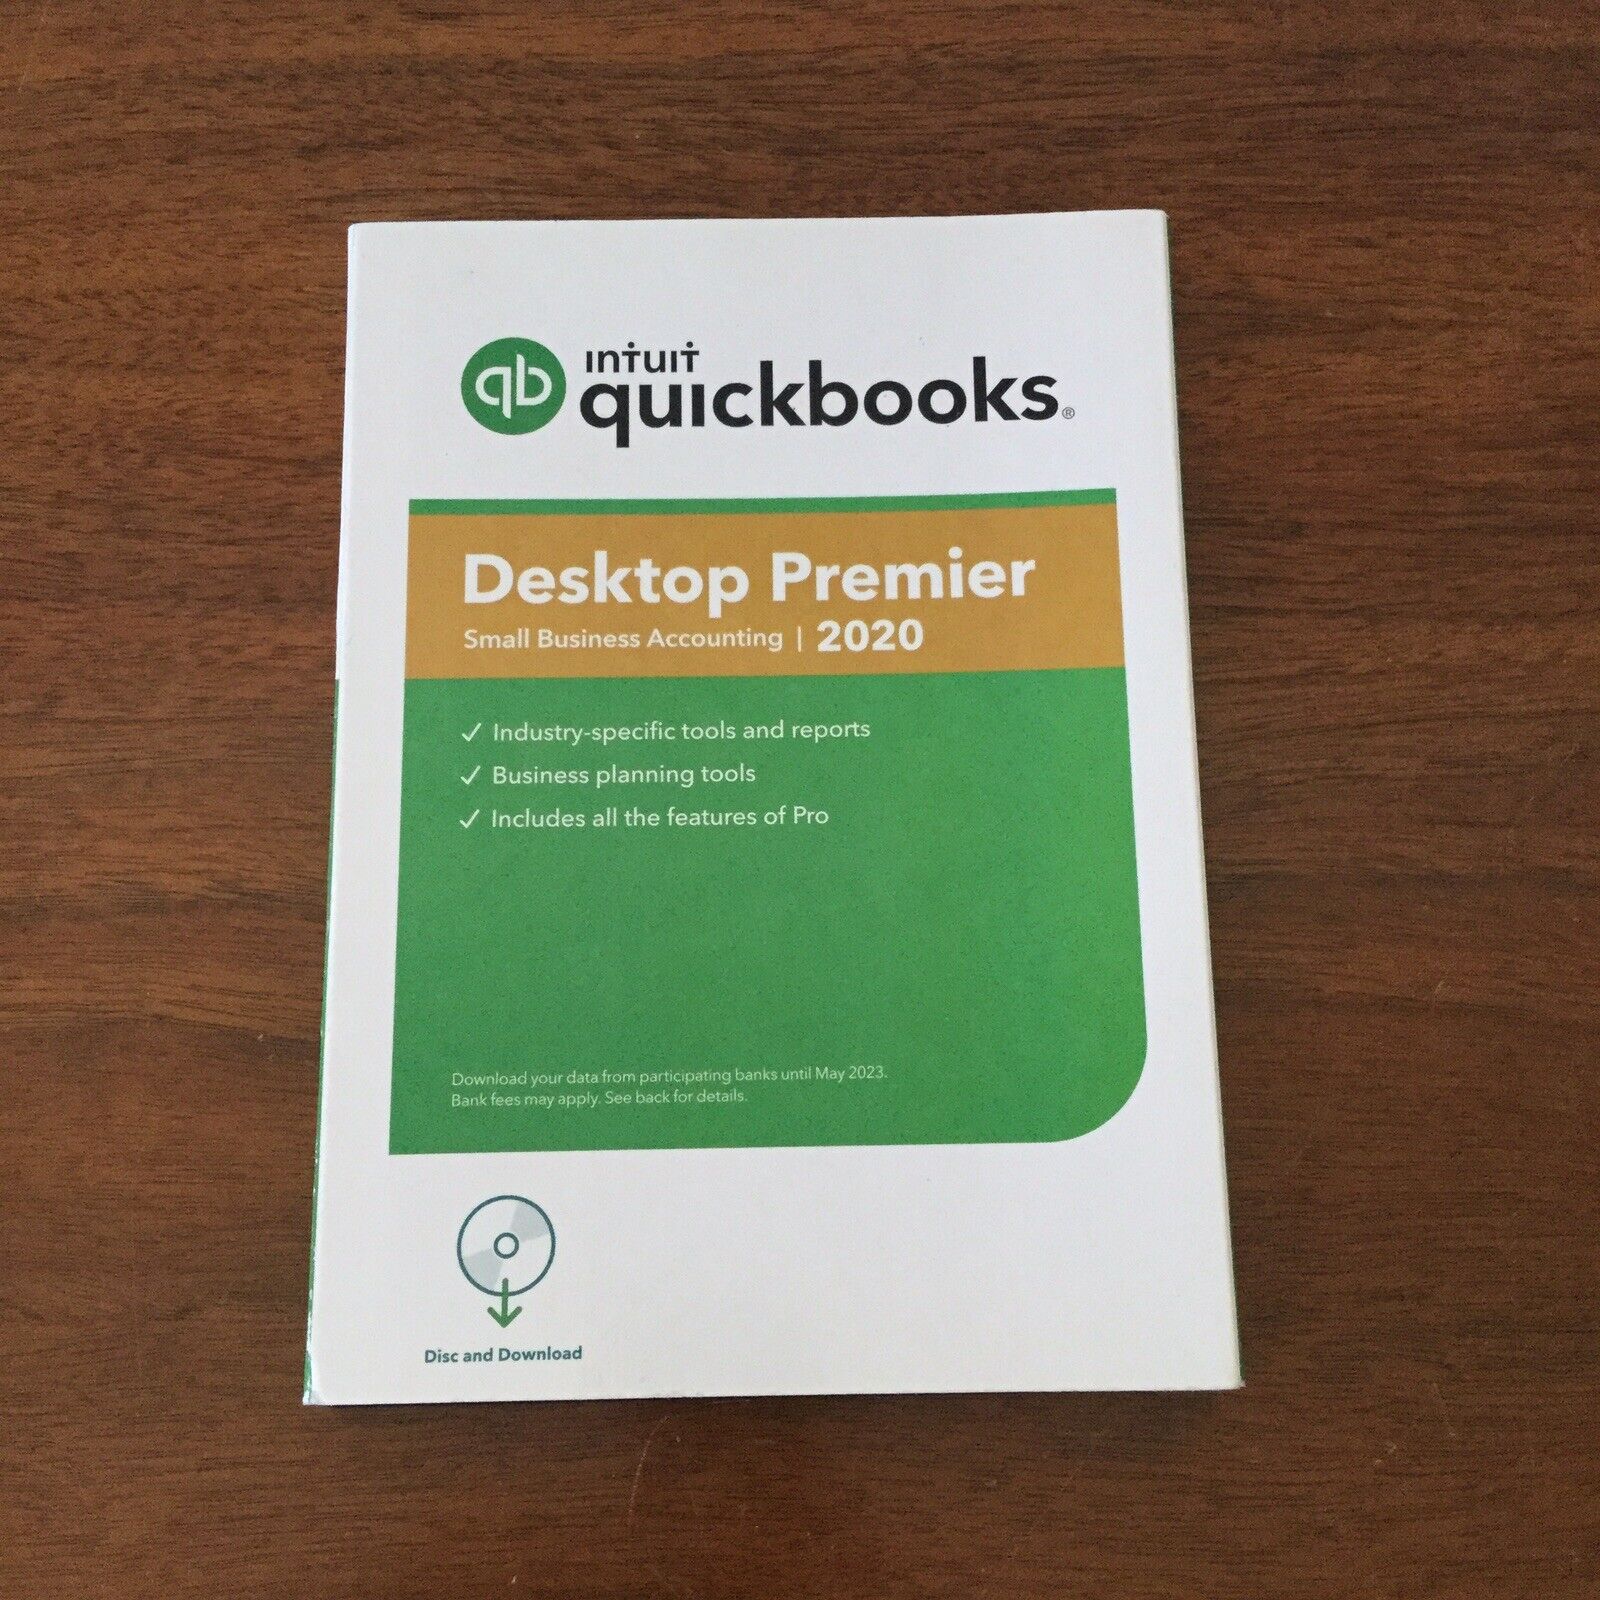 Intuit Quickbooks Desktop Premier 2020 for Windows Small Business Accounting